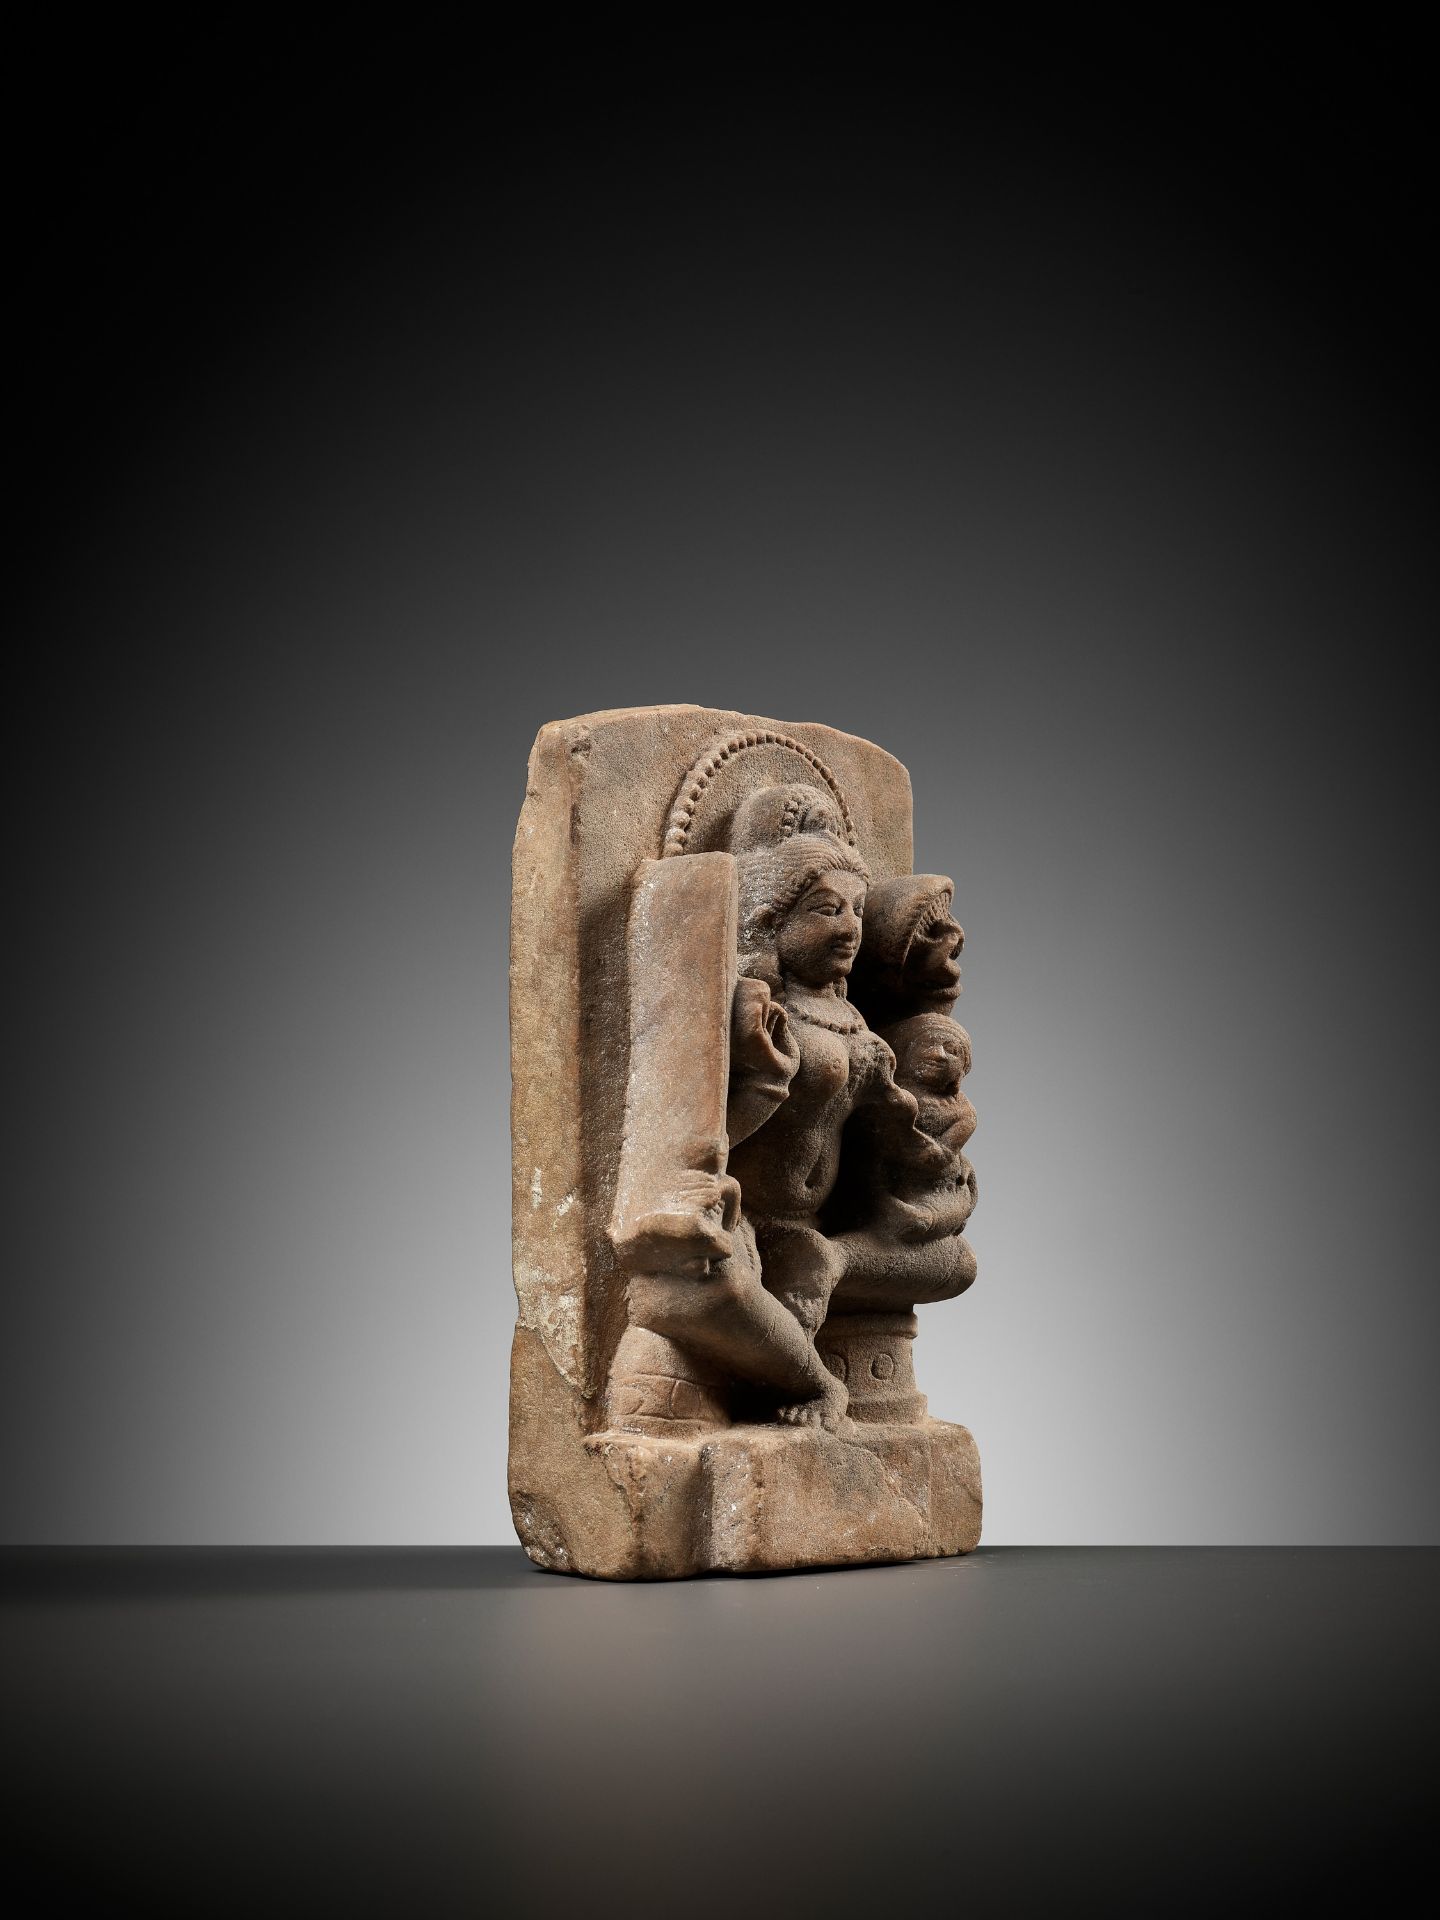 A RARE SANDSTONE MINATURE STELE FIGURE OF A MOTHER GODDESS WITH CHILD - Image 8 of 10